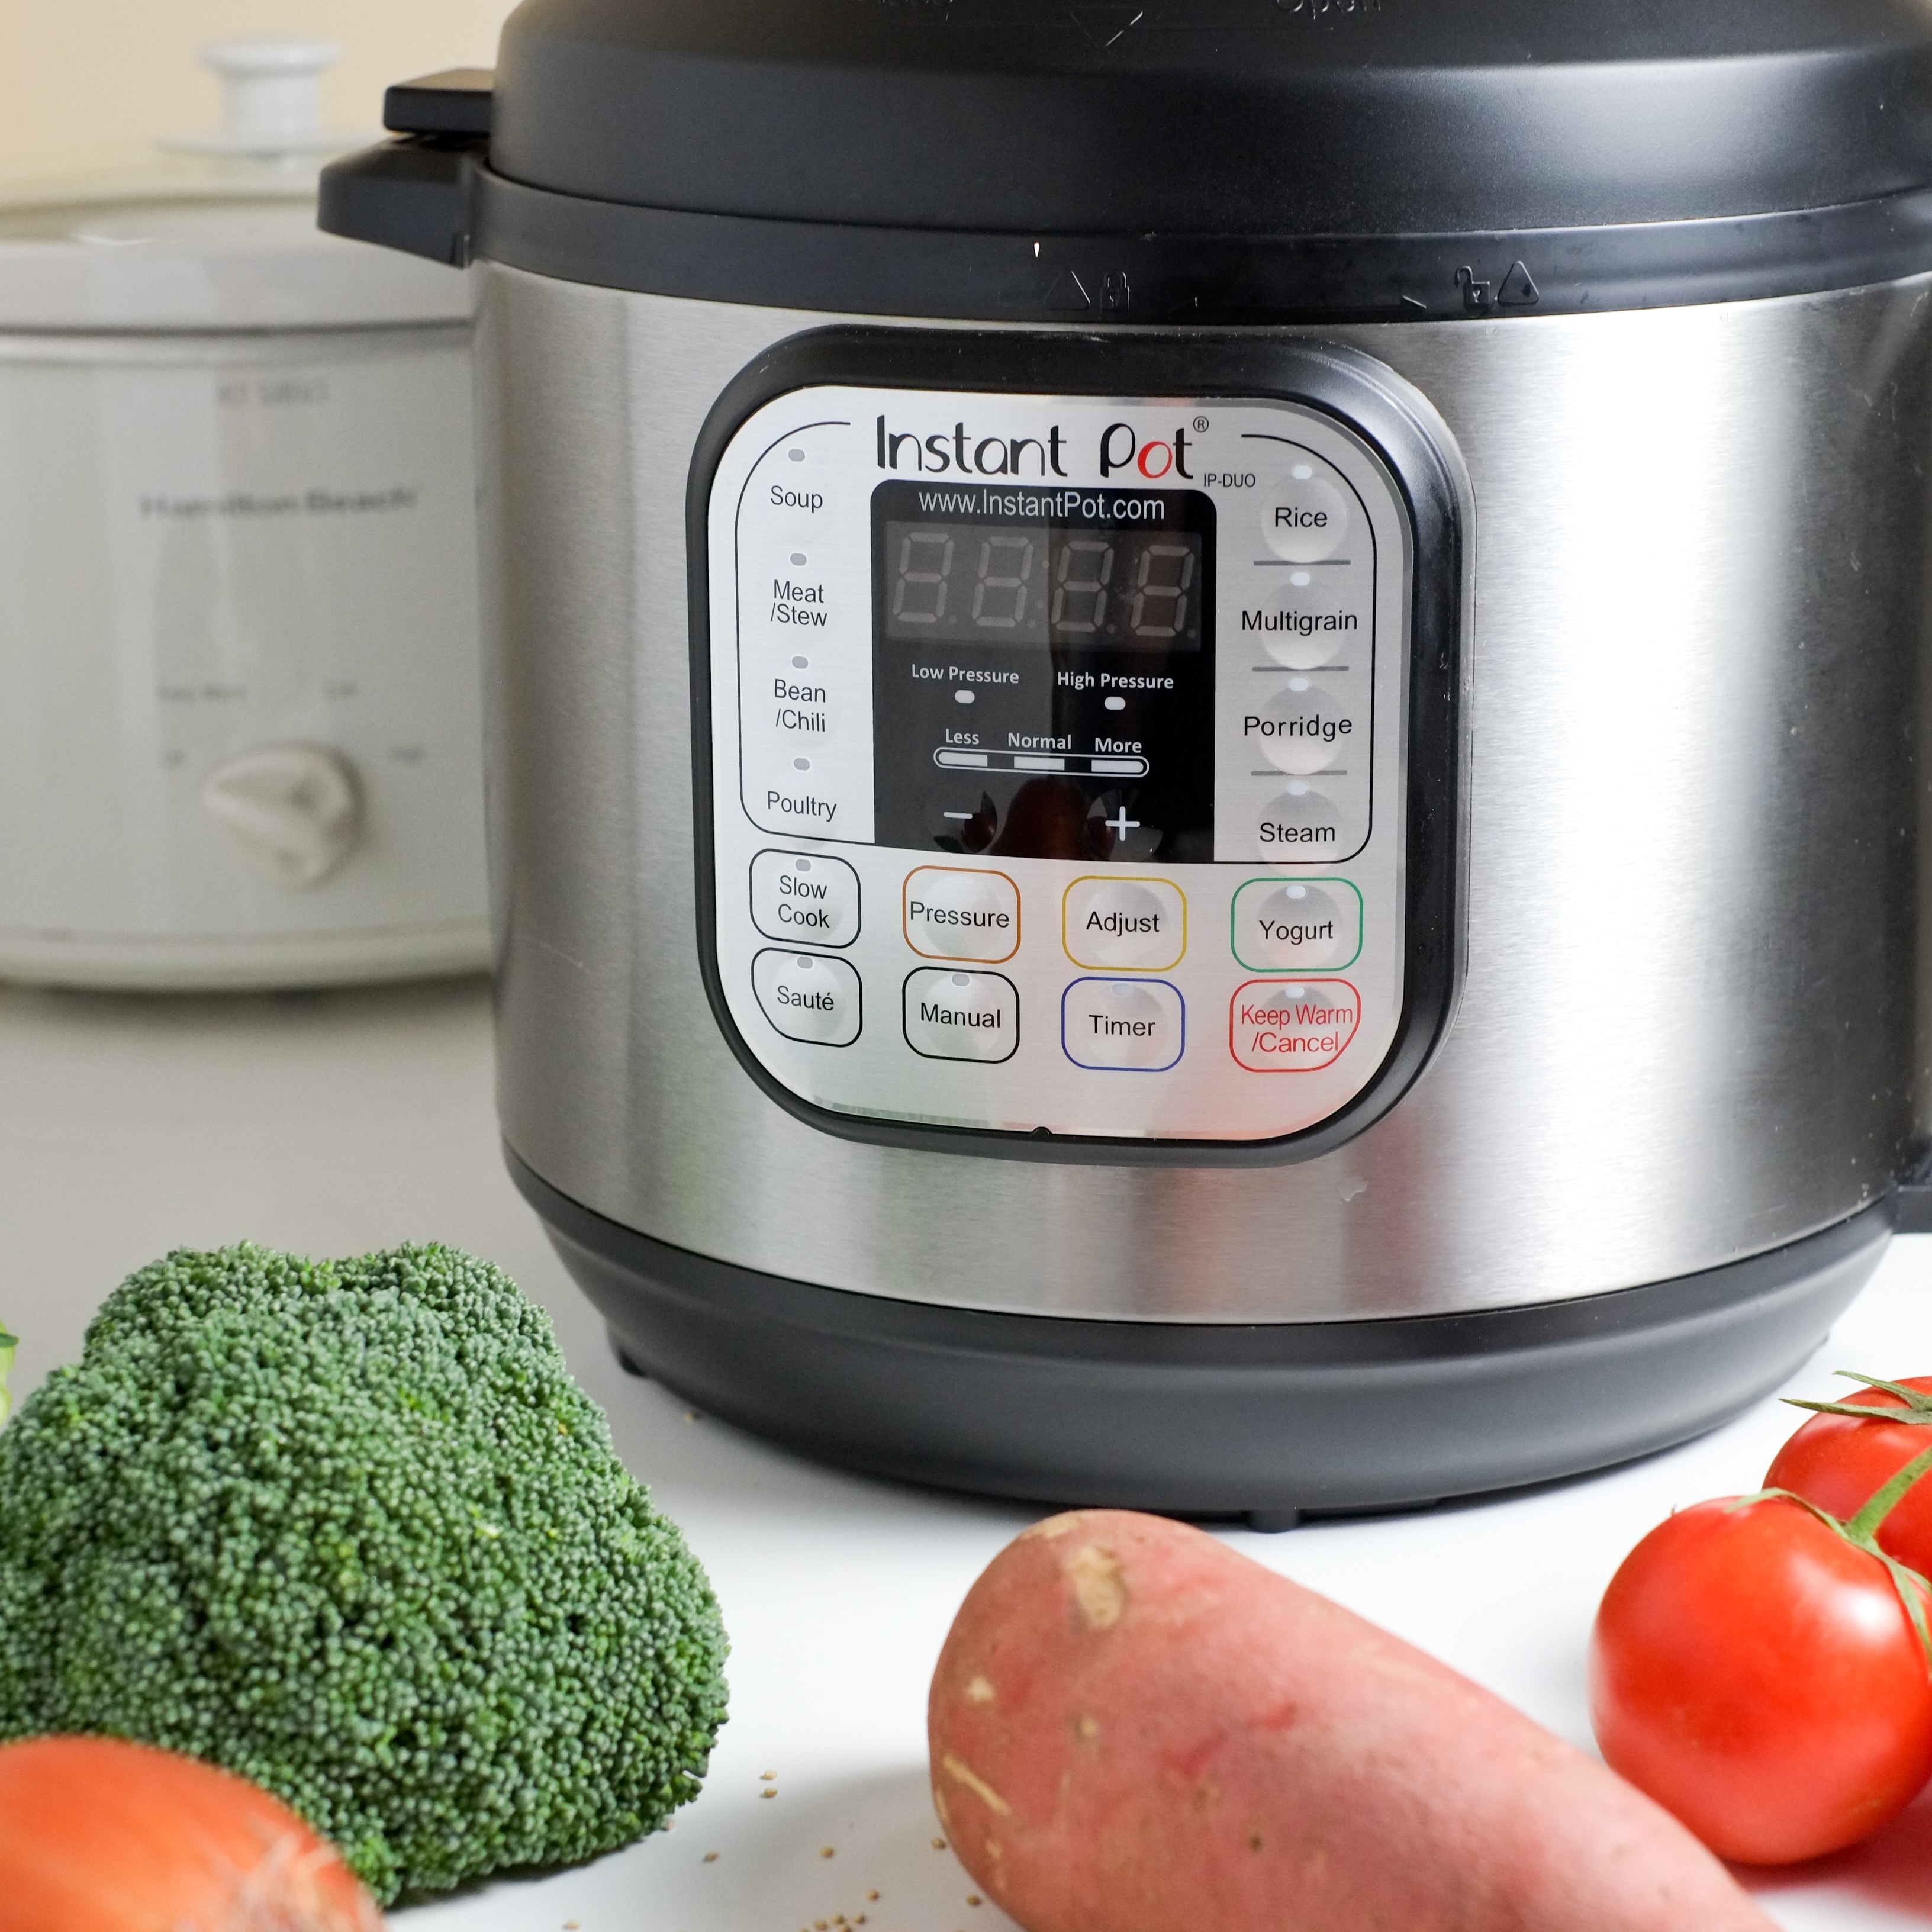 Conversion Chart From Slow Cooker To Pressure Cooker